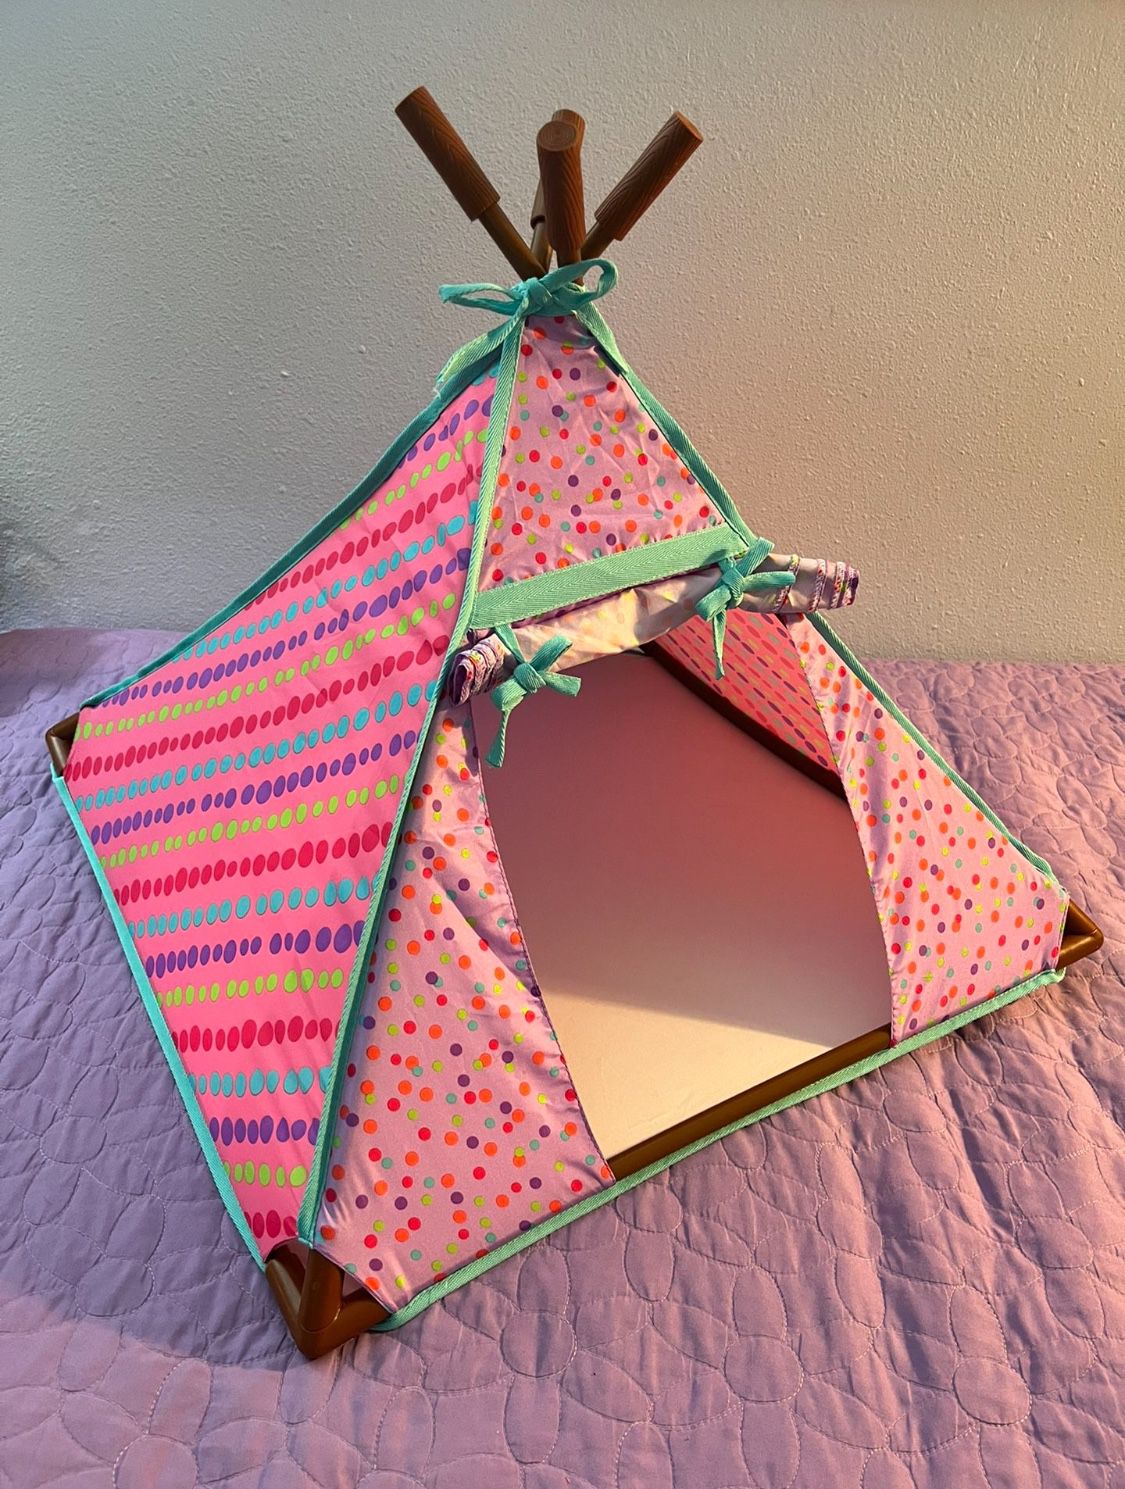 18in Journey Girl doll tent